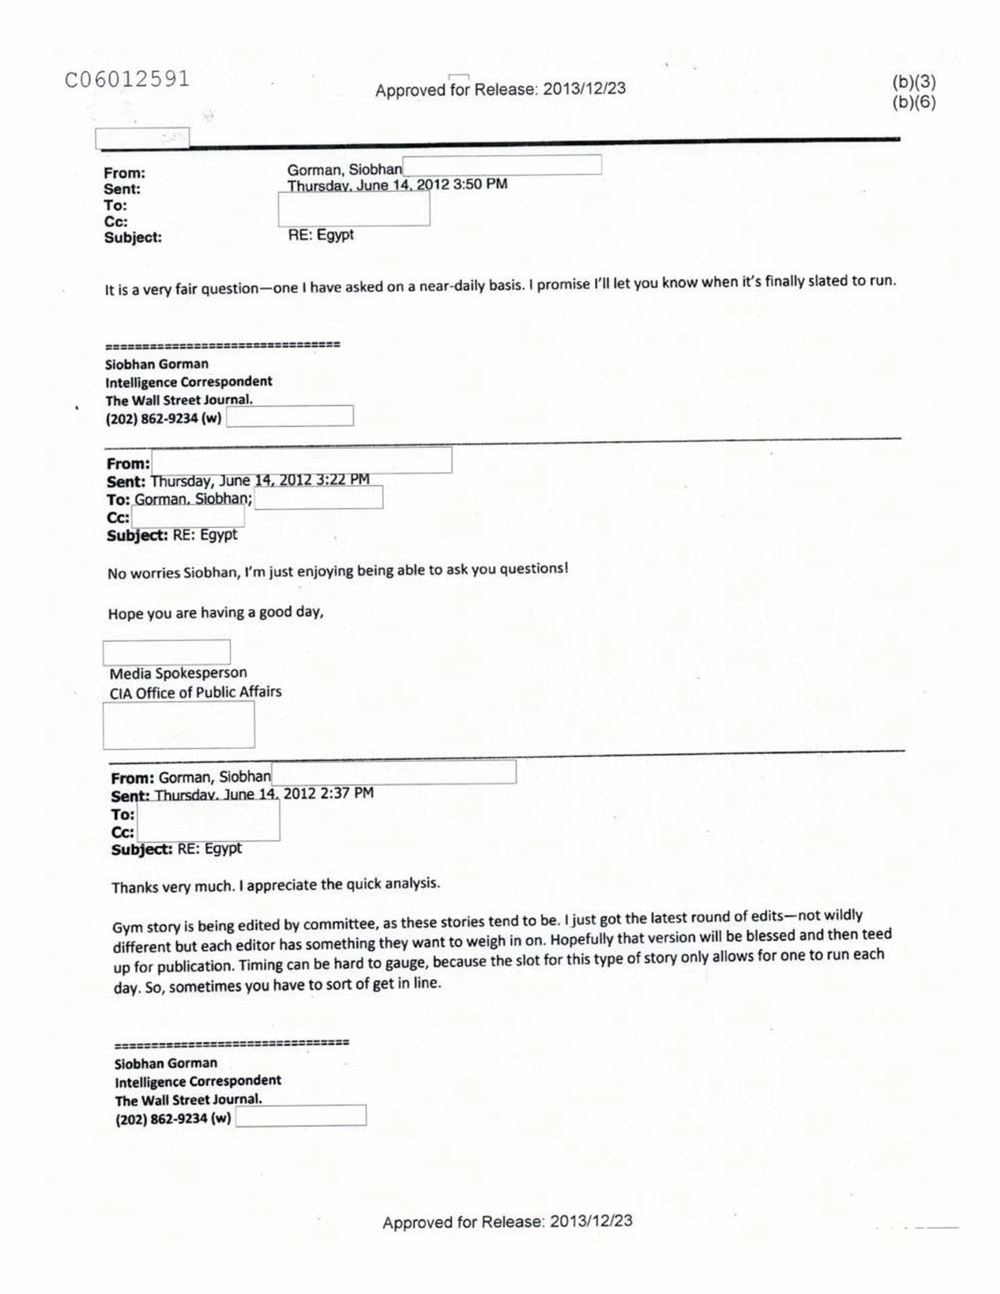 Page 146 from Email Correspondence Between Reporters and CIA Flacks